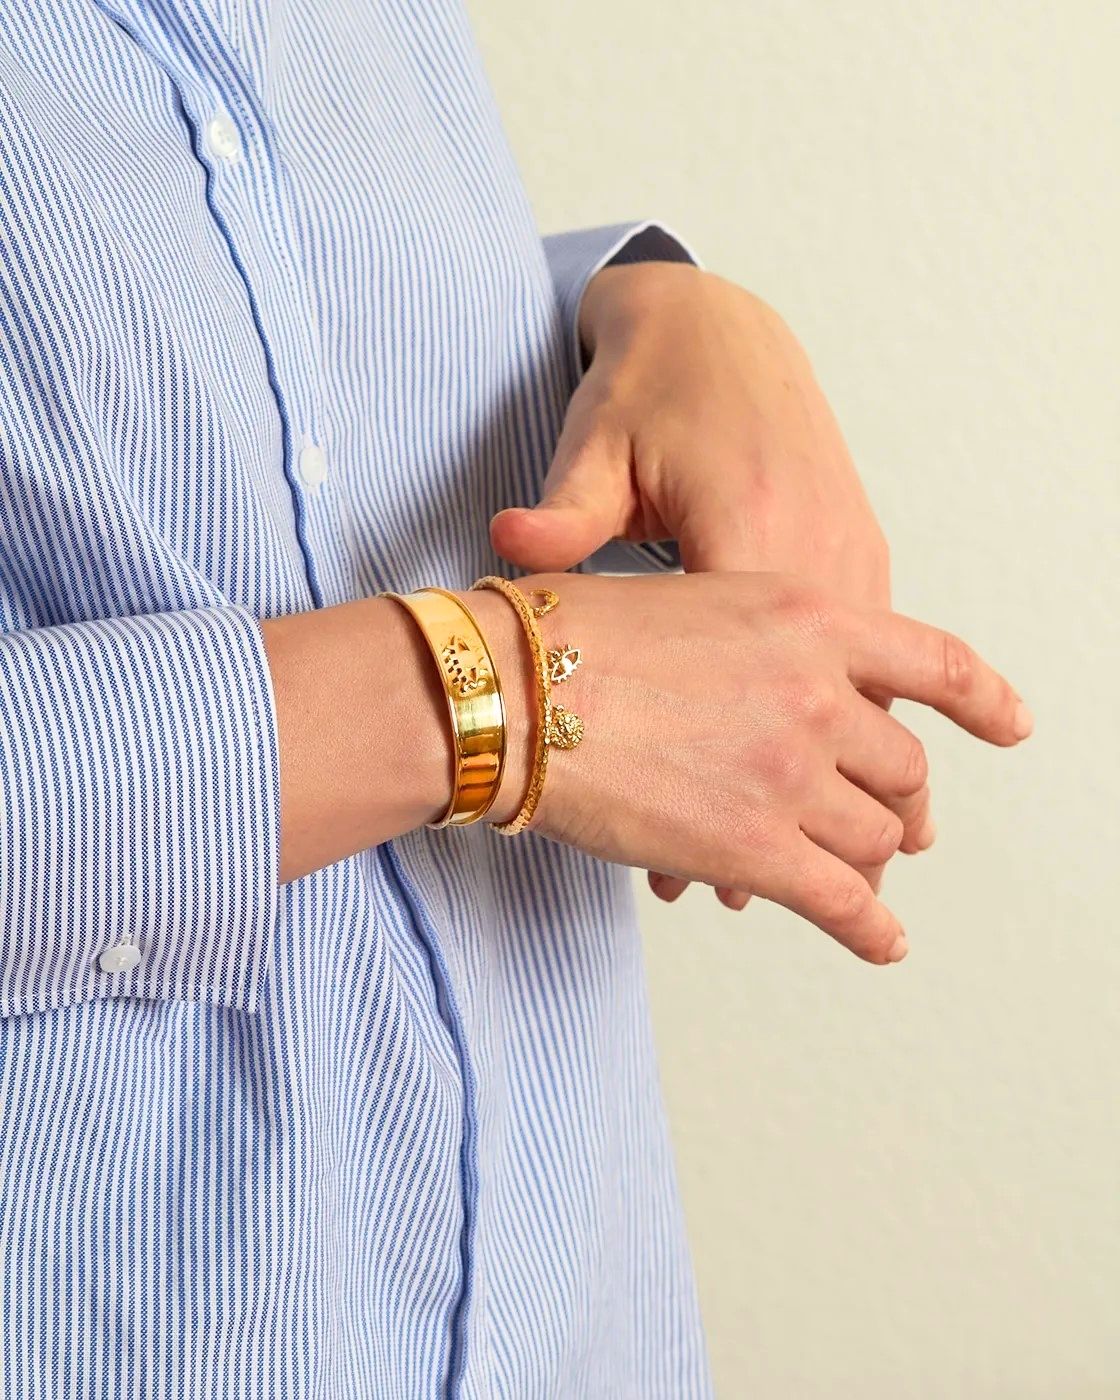 Ammos Universe Gold-Plated Thin Cuff